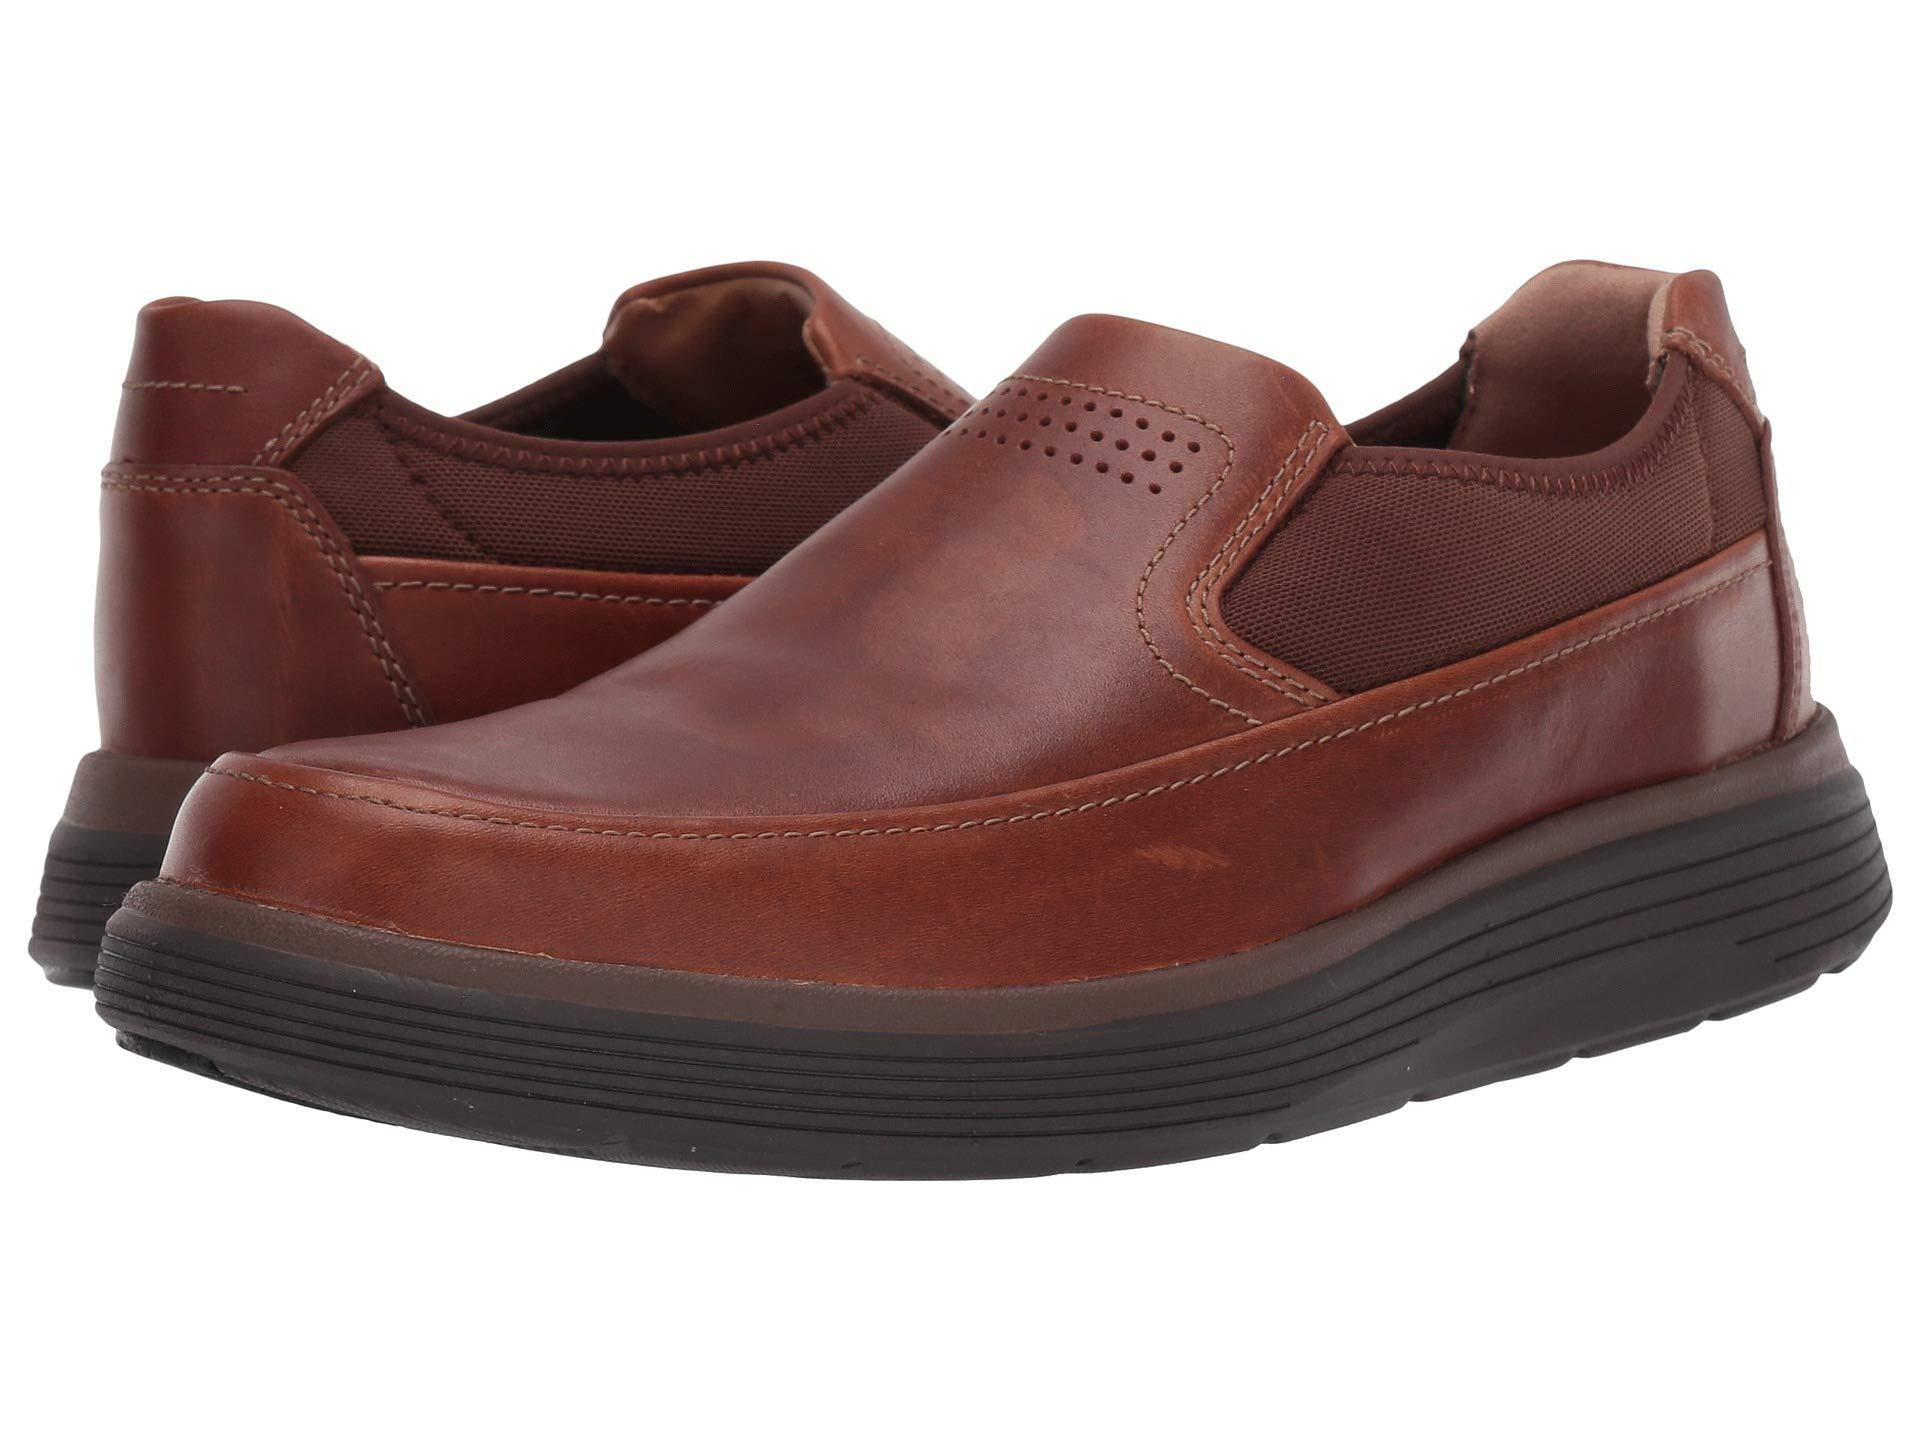 Clarks Leather Clarks Un Abode Go Loafer in Dark Tan Leather (Brown ...